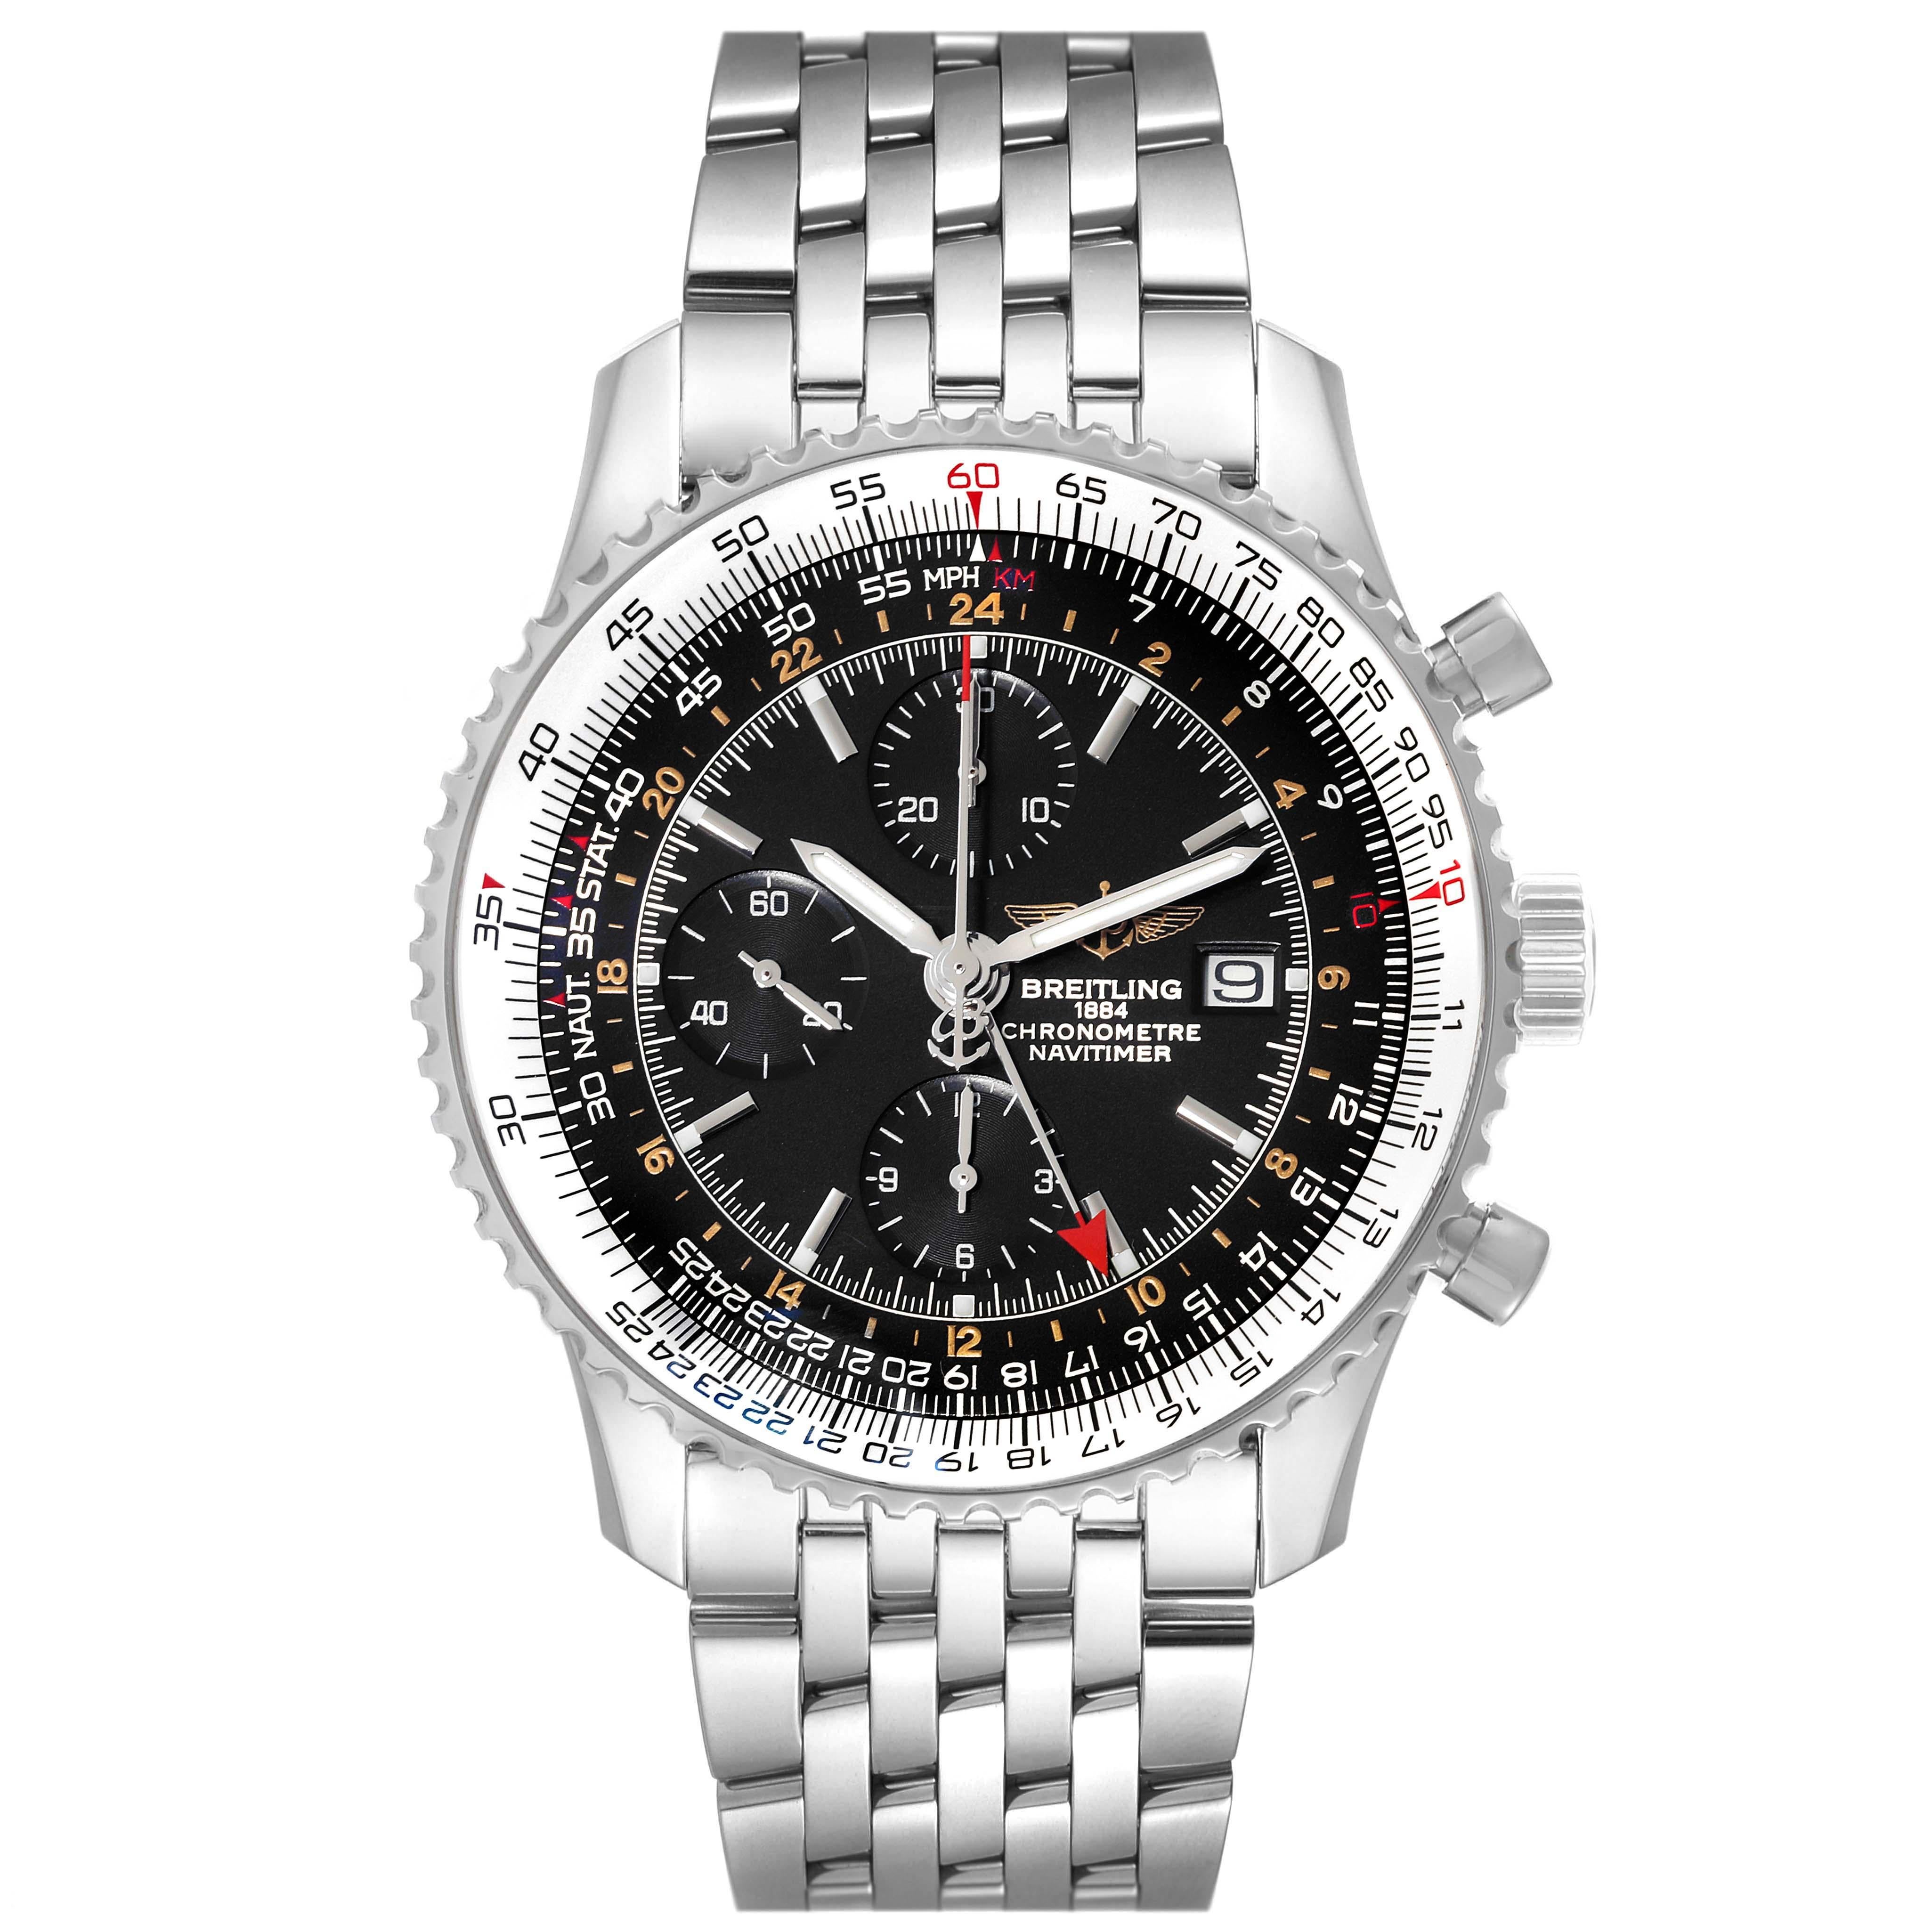 Breitling Navitimer World Black Dial Steel Mens Watch A24322 Box Card. Self-winding automatic officially certified chronometer movement. Chronograph function. Stainless steel case 46.0 mm in diameter. Stainless steel crown and pushers. Stainless